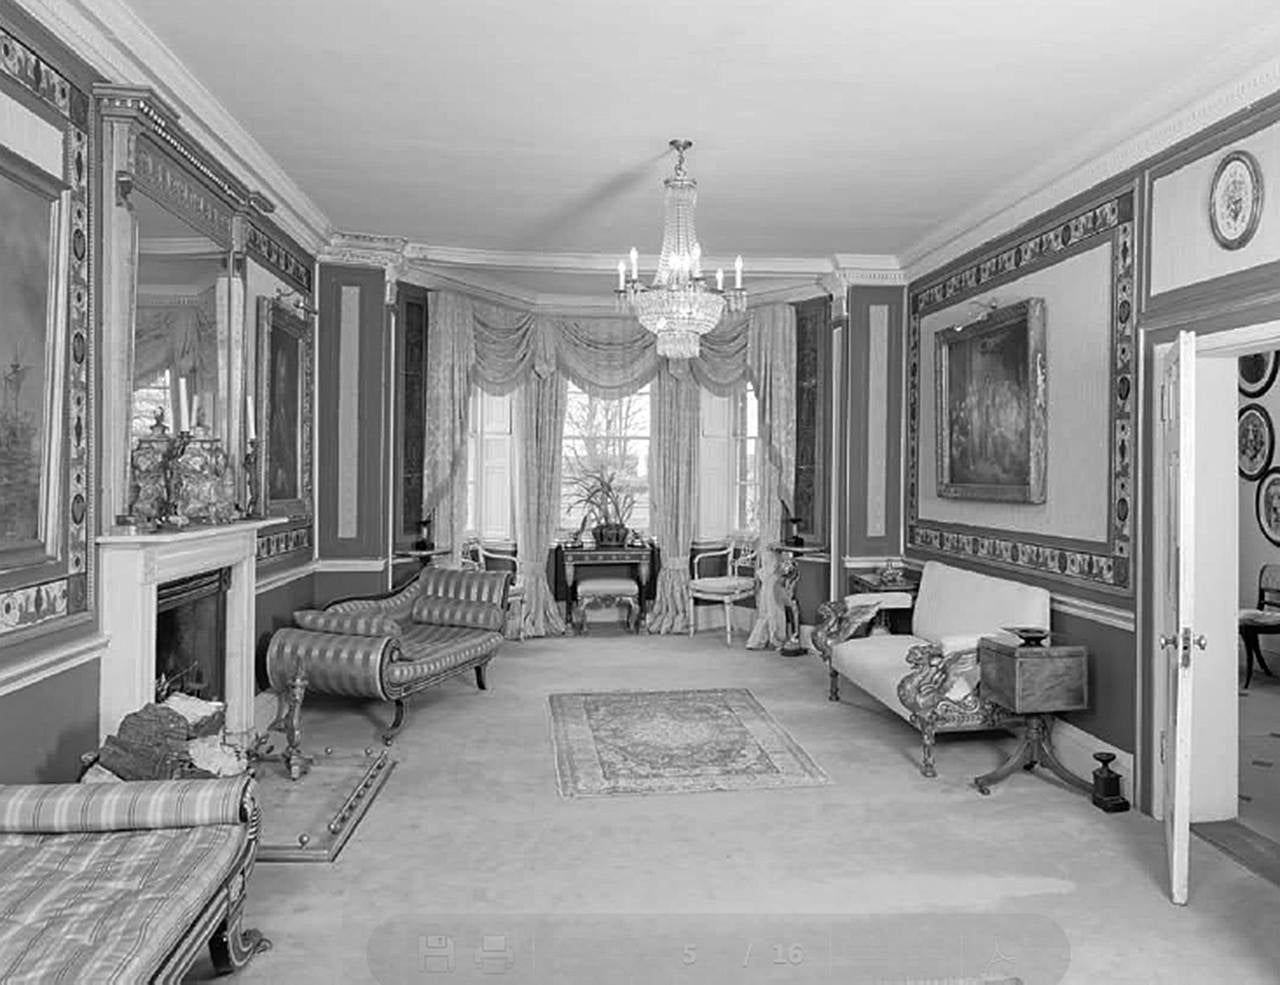 The carved neoclassical frame with ebonized and gilt acanthus decoration.

This Grecian chaise longue was part of a suite supplied for the drawing room at Crawley House in around 1806.

Provenance
Crawley House, Husborne Crawley,